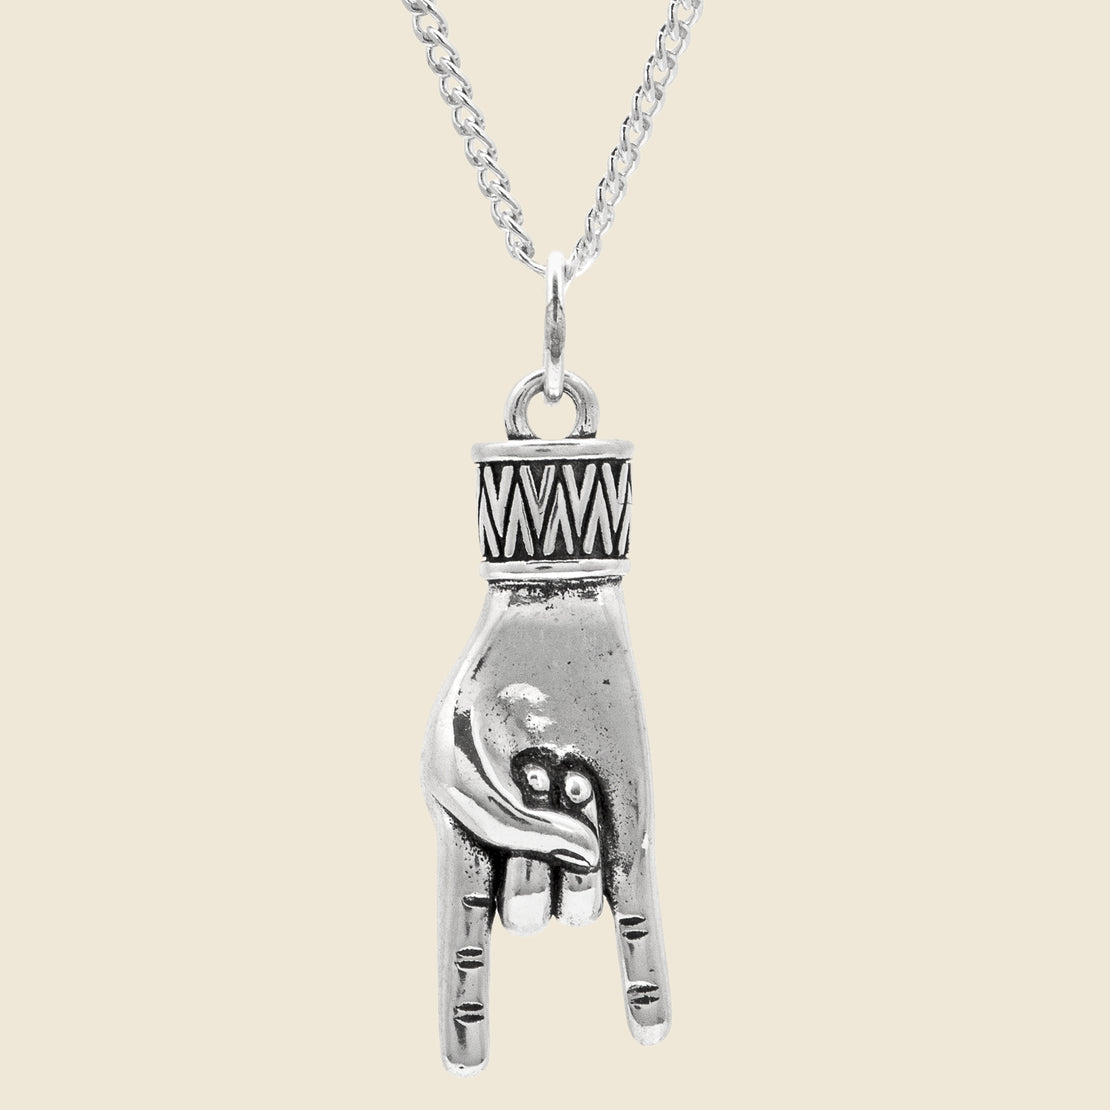 LHN Jewelry Hand Horn Necklace - Silver